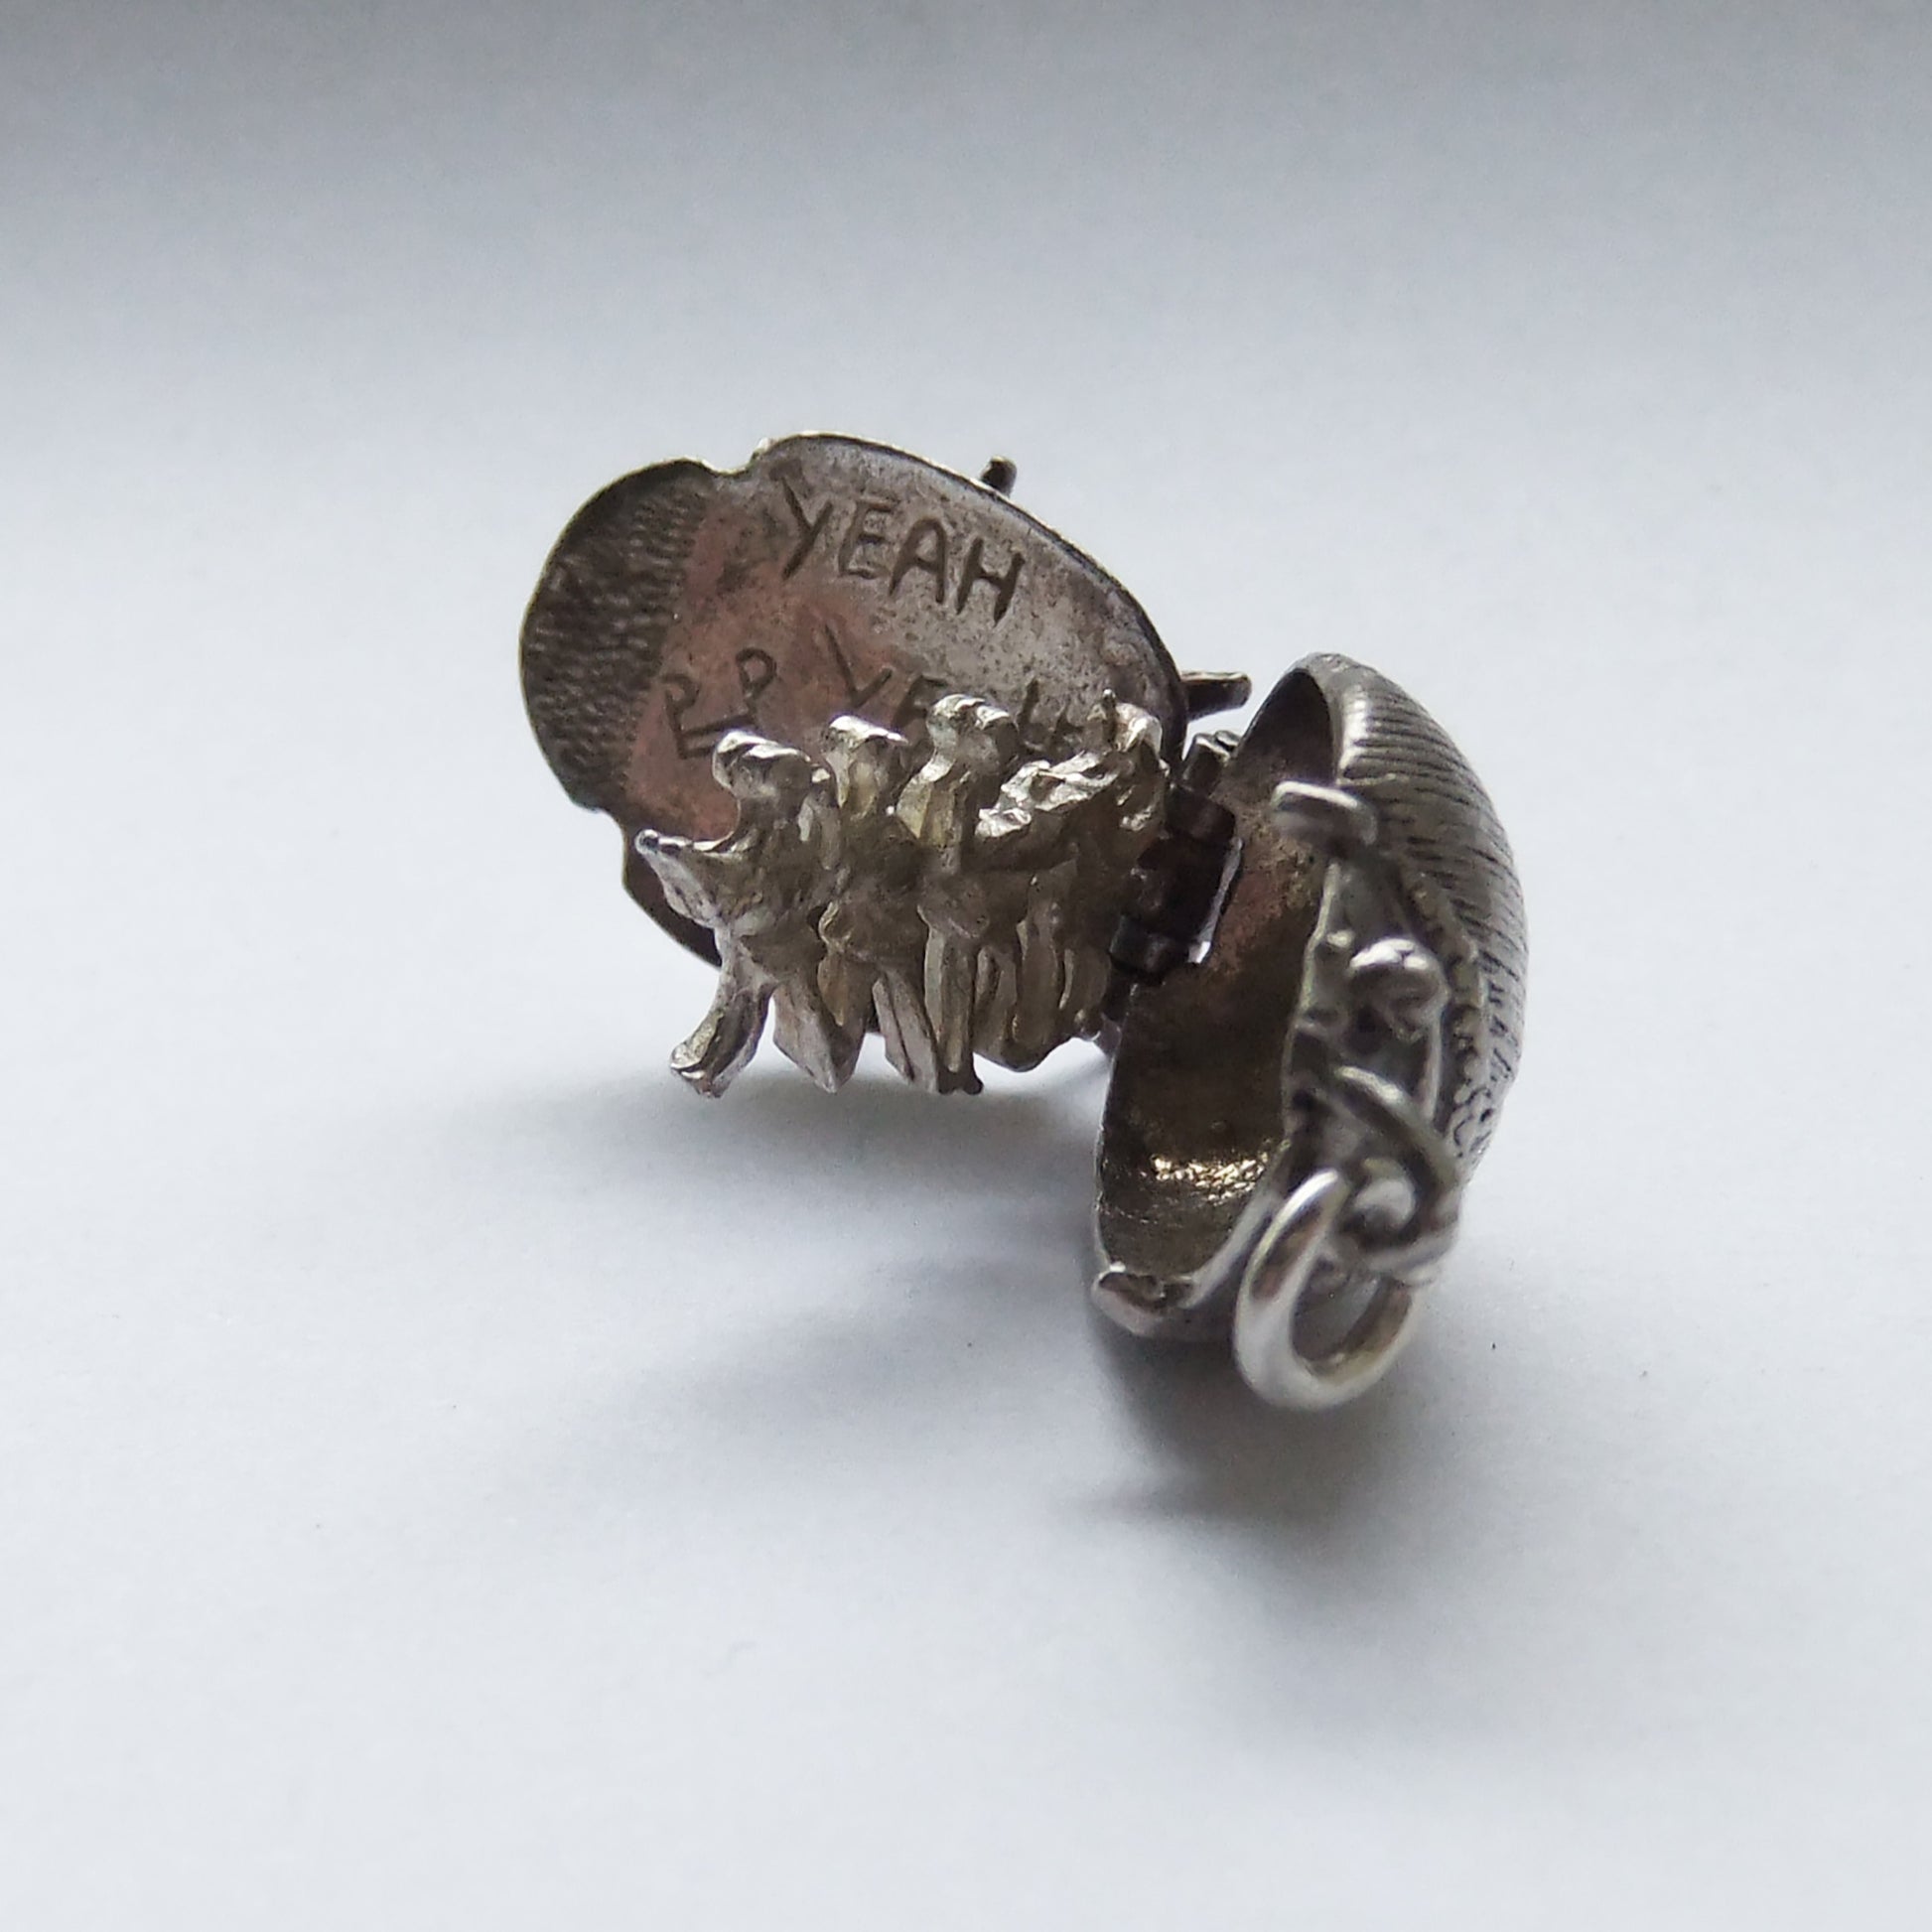 Vintage Beetle Charm Silver Beatles Opens to Band Members